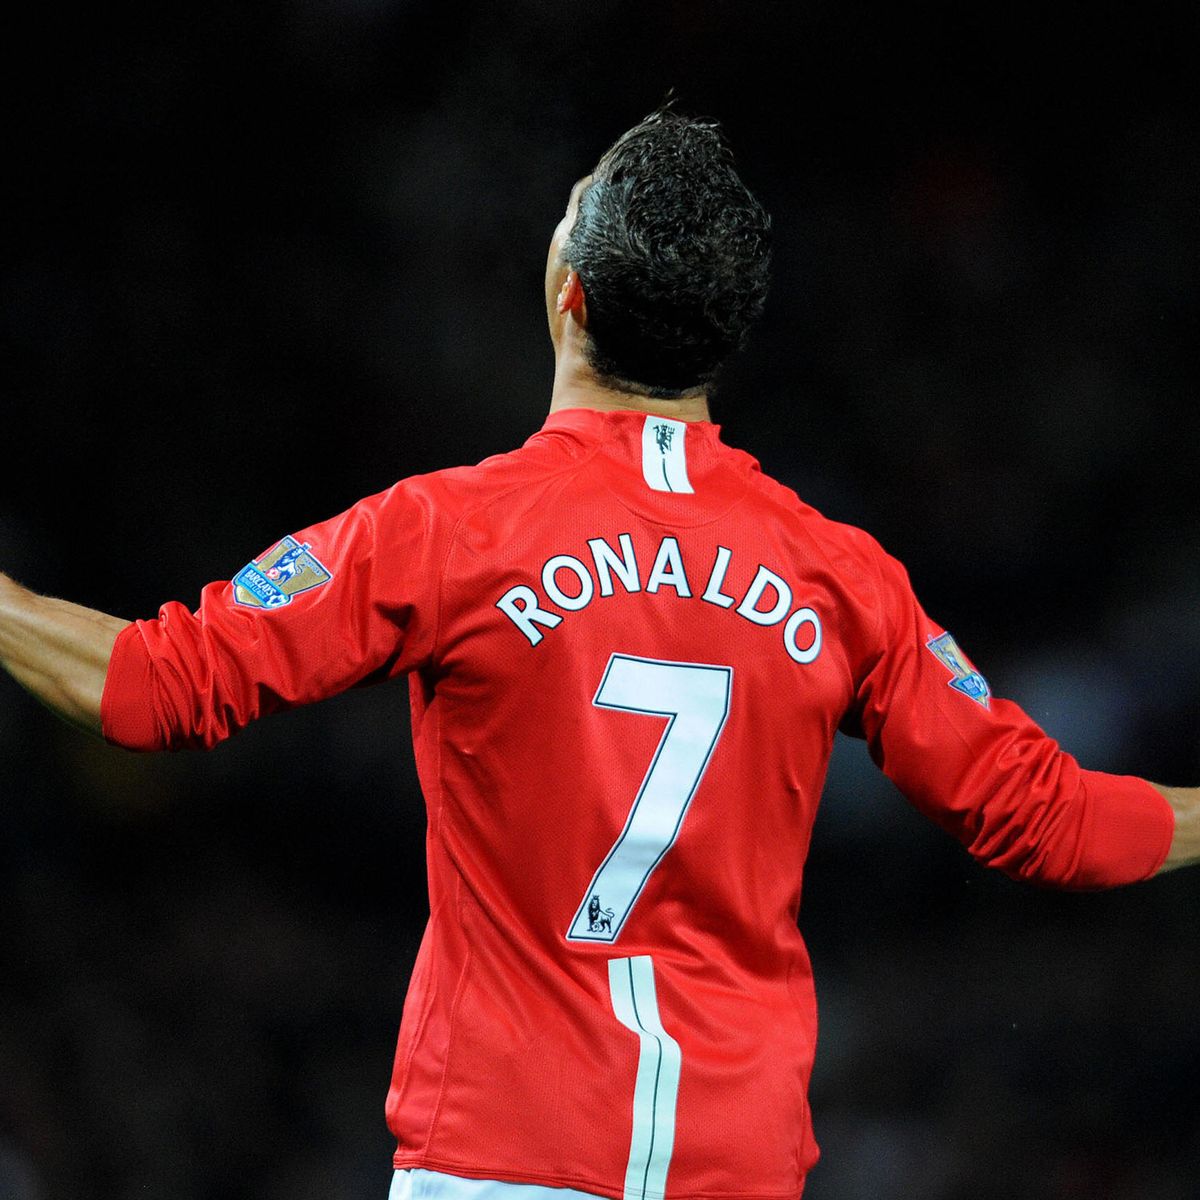 Man Utd submit request to Premier League over Cristiano Ronaldo shirt number